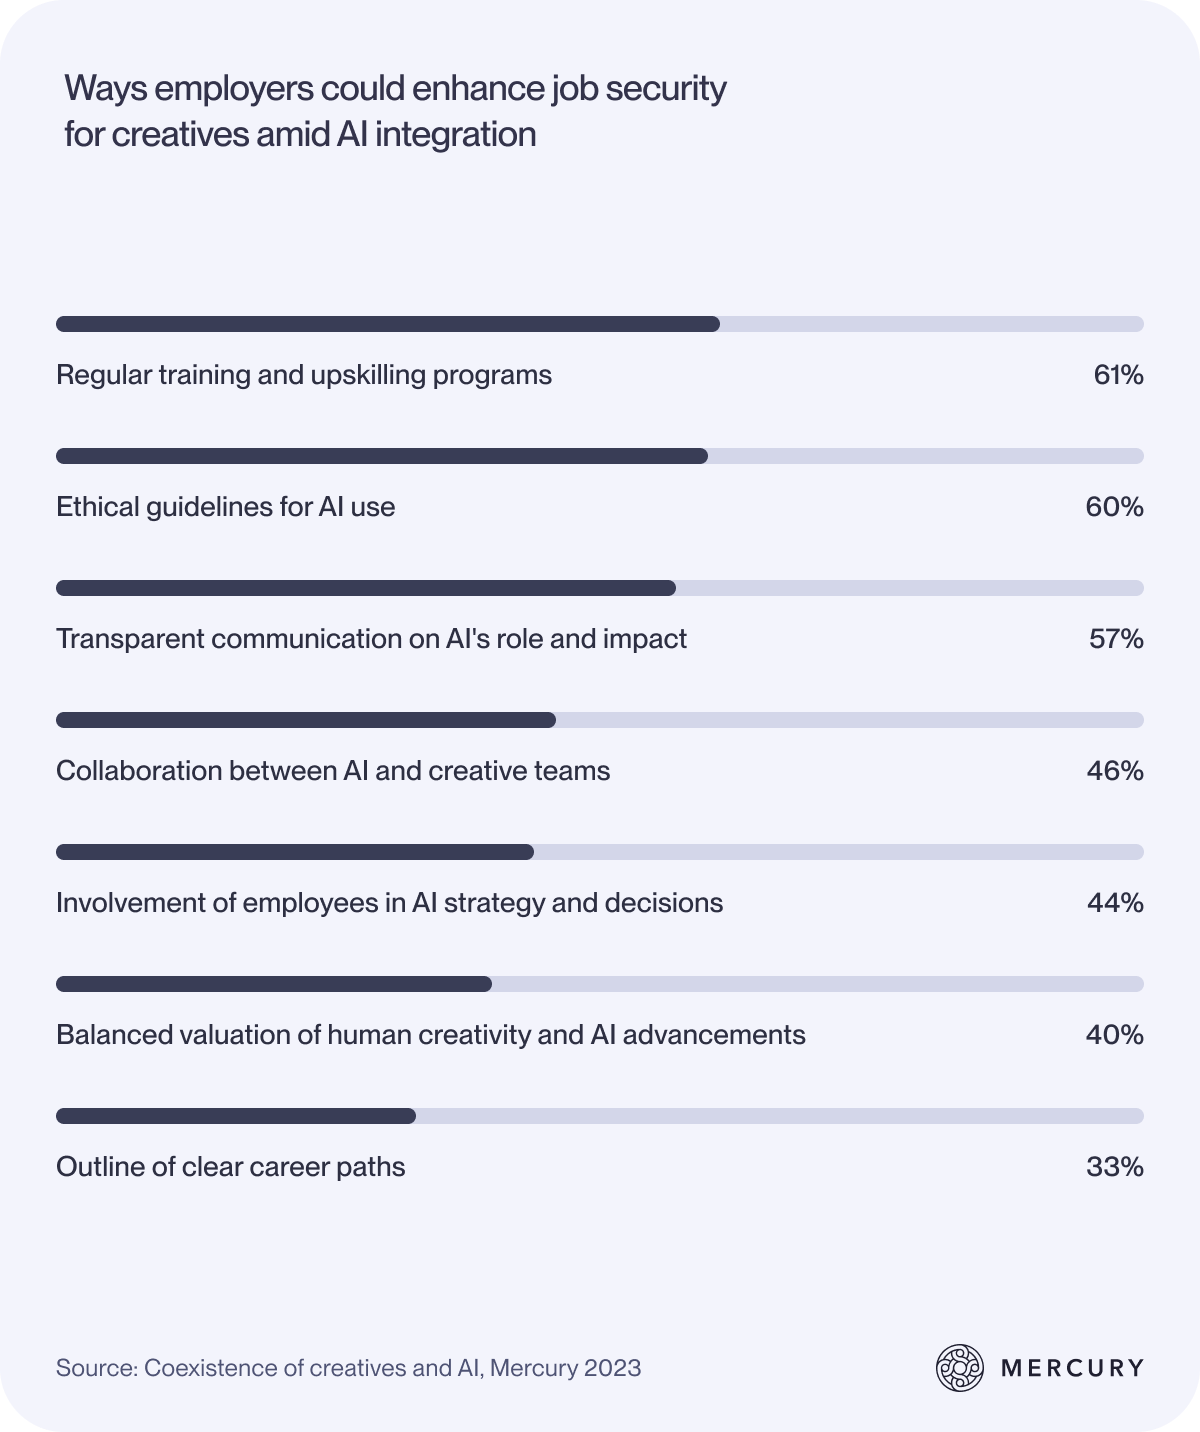 Bar chart showing ways in which employers could enhance job security for creatives amid AI integration